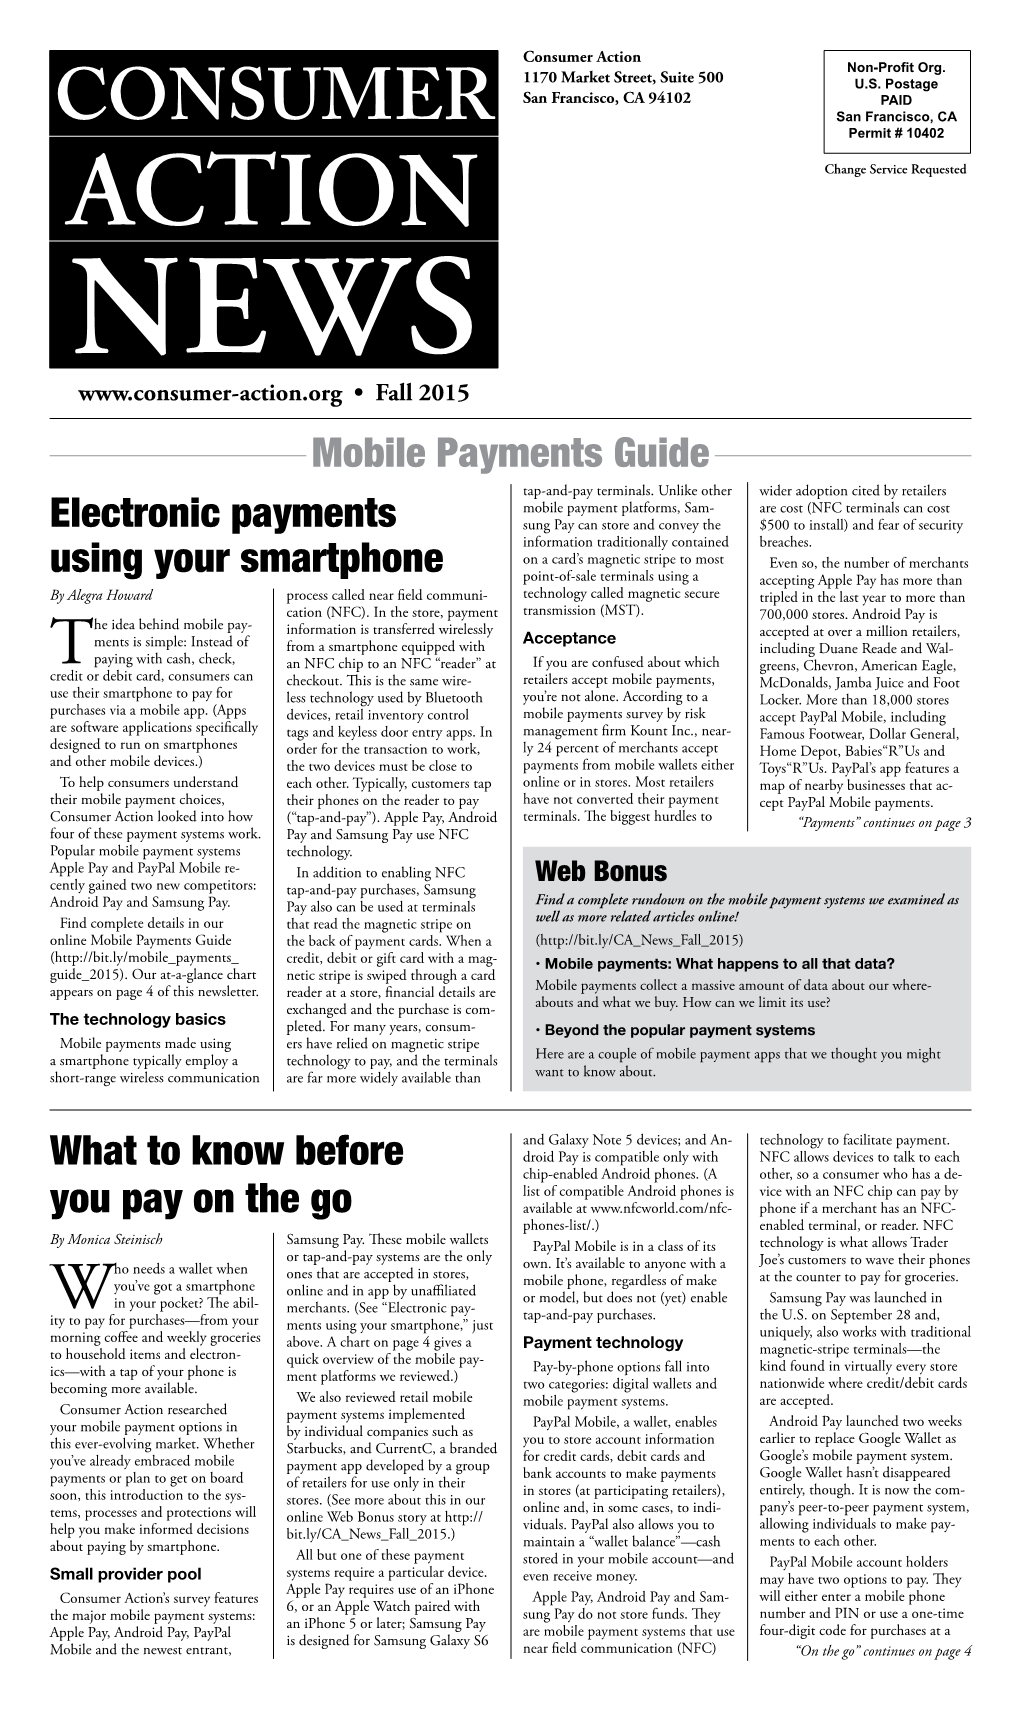 Mobile Payments Guide Tap-And-Pay Terminals